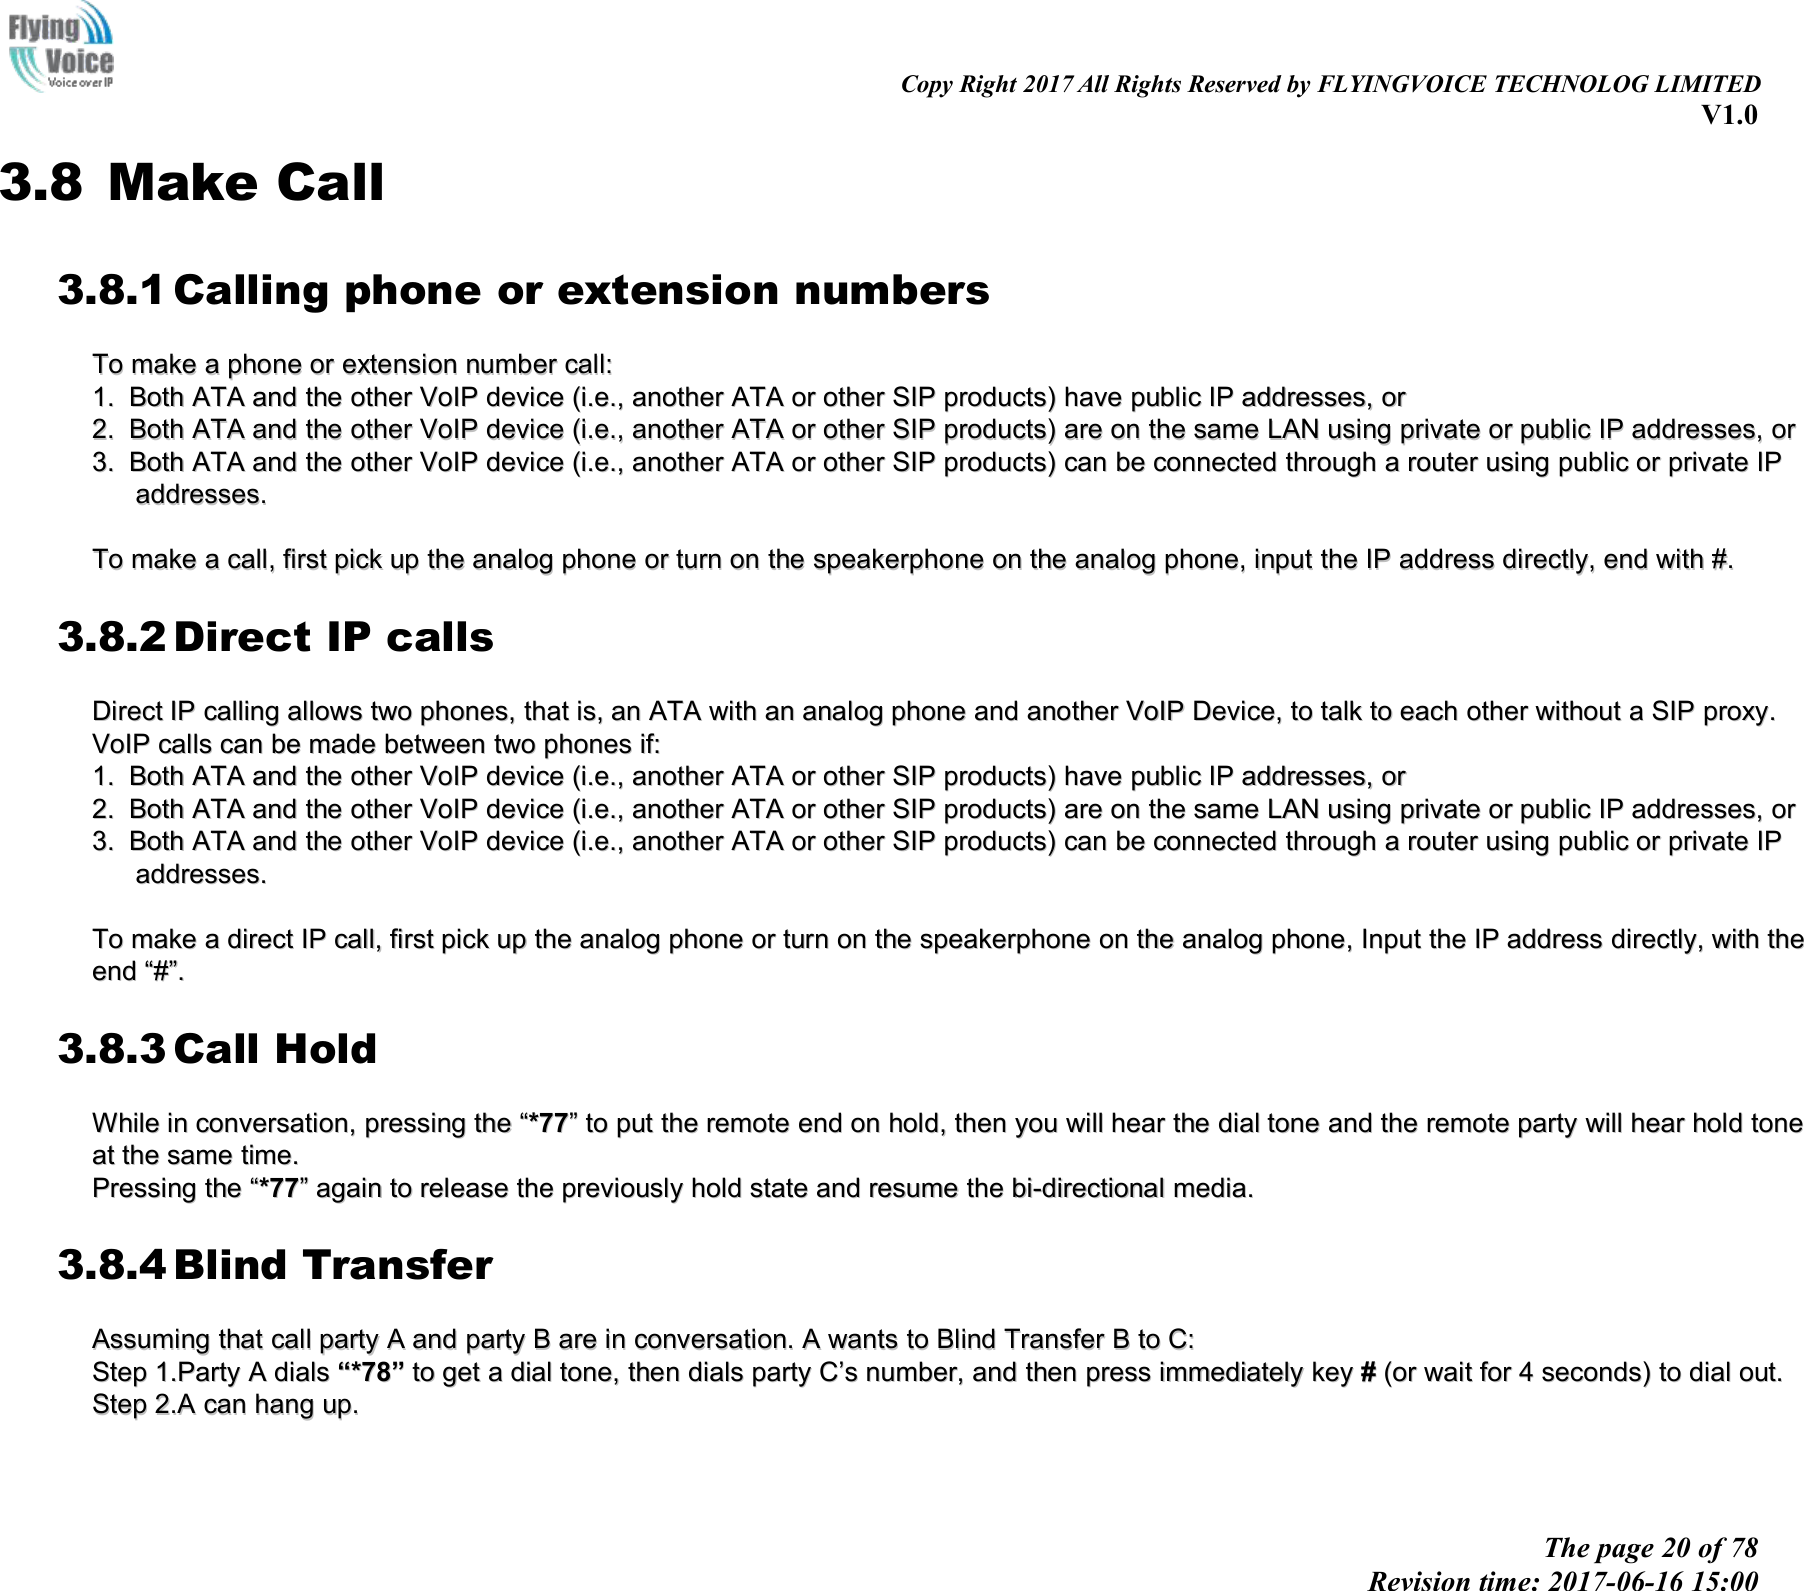 Copy Right 2017 All Rights Reserved by FLYINGVOICE TECHNOLOG LIMITEDV1.0The page 20 of 78Revision time: 2017-06-16 15:003.8 Make Call3.8.1 Calling phone or extension numbersToTo makemake aaphonephone oror extensionextension numbernumber call:call:1.1. BothBoth ATAATA andand thethe otherother VoIPVoIP devicedevice (i.e.,(i.e., anotheranother ATAATA oror otherother SIPSIP products)products) havehave publicpublic IPIP addresses,addresses, oror2.2. BothBoth ATAATA andand thethe otherother VoIPVoIP devicedevice (i.e.,(i.e., anotheranother ATAATA oror otherother SIPSIP products)products) areare onon thethe samesame LANLAN usingusing privateprivate oror publicpublic IPIP addresses,addresses, oror3.3. BothBoth ATAATA andand thethe otherother VoIPVoIP devicedevice (i.e.,(i.e., anotheranother ATAATA oror otherother SIPSIP products)products) cancan bebe connectedconnected throughthrough aarouterrouter usingusing publicpublic oror privateprivate IPIPaddresses.addresses.ToTo makemake aacall,call, firstfirst pickpick upup thethe analoganalog phonephone oror turnturn onon thethe speakerphonespeakerphone onon thethe analoganalog phone,phone, iinputnput thethe IPIP addressaddress directly,directly, endend withwith #.#.3.8.2 Direct IP callsDirectDirect IPIP callingcalling allowsallows twotwo phones,phones, thatthat is,is, anan ATAATA withwith anan analoganalog phonephone andand anotheranother VoIPVoIP Device,Device, toto talktalk toto eacheach otherother withoutwithout aaSIPSIP proxy.proxy.VoIPVoIP callscalls cancan bebe mademade betweenbetween twotwo phonesphones if:if:1.1. BothBoth ATAATA andand thethe otherother VoIPVoIP devicedevice (i.e.,(i.e., anotheranother ATAATA oror otherother SIPSIP products)products) havehave publicpublic IPIP addresses,addresses, oror2.2. BothBoth ATAATA andand thethe otherother VoIPVoIP devicedevice (i.e.,(i.e., anotheranother ATAATA oror otherother SIPSIP products)products) areare onon thethe samesame LANLAN usingusing privateprivate oror publicpublic IPIP addresses,addresses, oror3.3. BothBoth ATAATA andand thethe otherother VoIPVoIP devicedevice (i.e.,(i.e., anotheranother ATAATA oror otherother SIPSIP products)products) cancan bebe connectedconnected throughthrough aarouterrouter usingusing publicpublic oror privateprivate IPIPaddresses.addresses.ToTo makemake aadirectdirect IPIP call,call, firstfirst pickpick upup thethe analoganalog phonephone oror turnturn onon thethe speakerphonespeakerphone onon thethe analoganalog phone,phone, InputInput thethe IPIP addressaddress directly,directly, withwith thetheendend ““##””..3.8.3 Call HoldWhileWhile inin conversation,conversation, presspressinging thethe ““*77*77””toto putput thethe remoteremote endend onon holdhold,,thenthen youyou willwill hearhear thethe dialdial tonetone andand thethe remoteremote partyparty willwill hearhear holdhold tonetoneatat thethe samesame time.time.PressingPressing thethe ““*77*77””againagain toto releaserelease thethe previouslypreviously hholdold statestate andand resumeresume thethe bi-directionalbi-directional media.media.3.8.4 Blind TransferAssumingAssuming thatthat callcall partyparty AAandand partyparty BBareare inin conversation.conversation. AAwantswants toto BlindBlind TransferTransfer BBtoto C:C:StepStep 1.Party1.Party AAdialsdials ““*78*78””toto getget aadialdial tone,tone, thenthen dialsdials partyparty CC’’ssnumber,number, andand thenthen presspress immediatelyimmediately keykey ##(or(or waitwait forfor 44seconds)seconds) toto dialdial out.out.StepStep 2.A2.A cancan hanghang up.up.